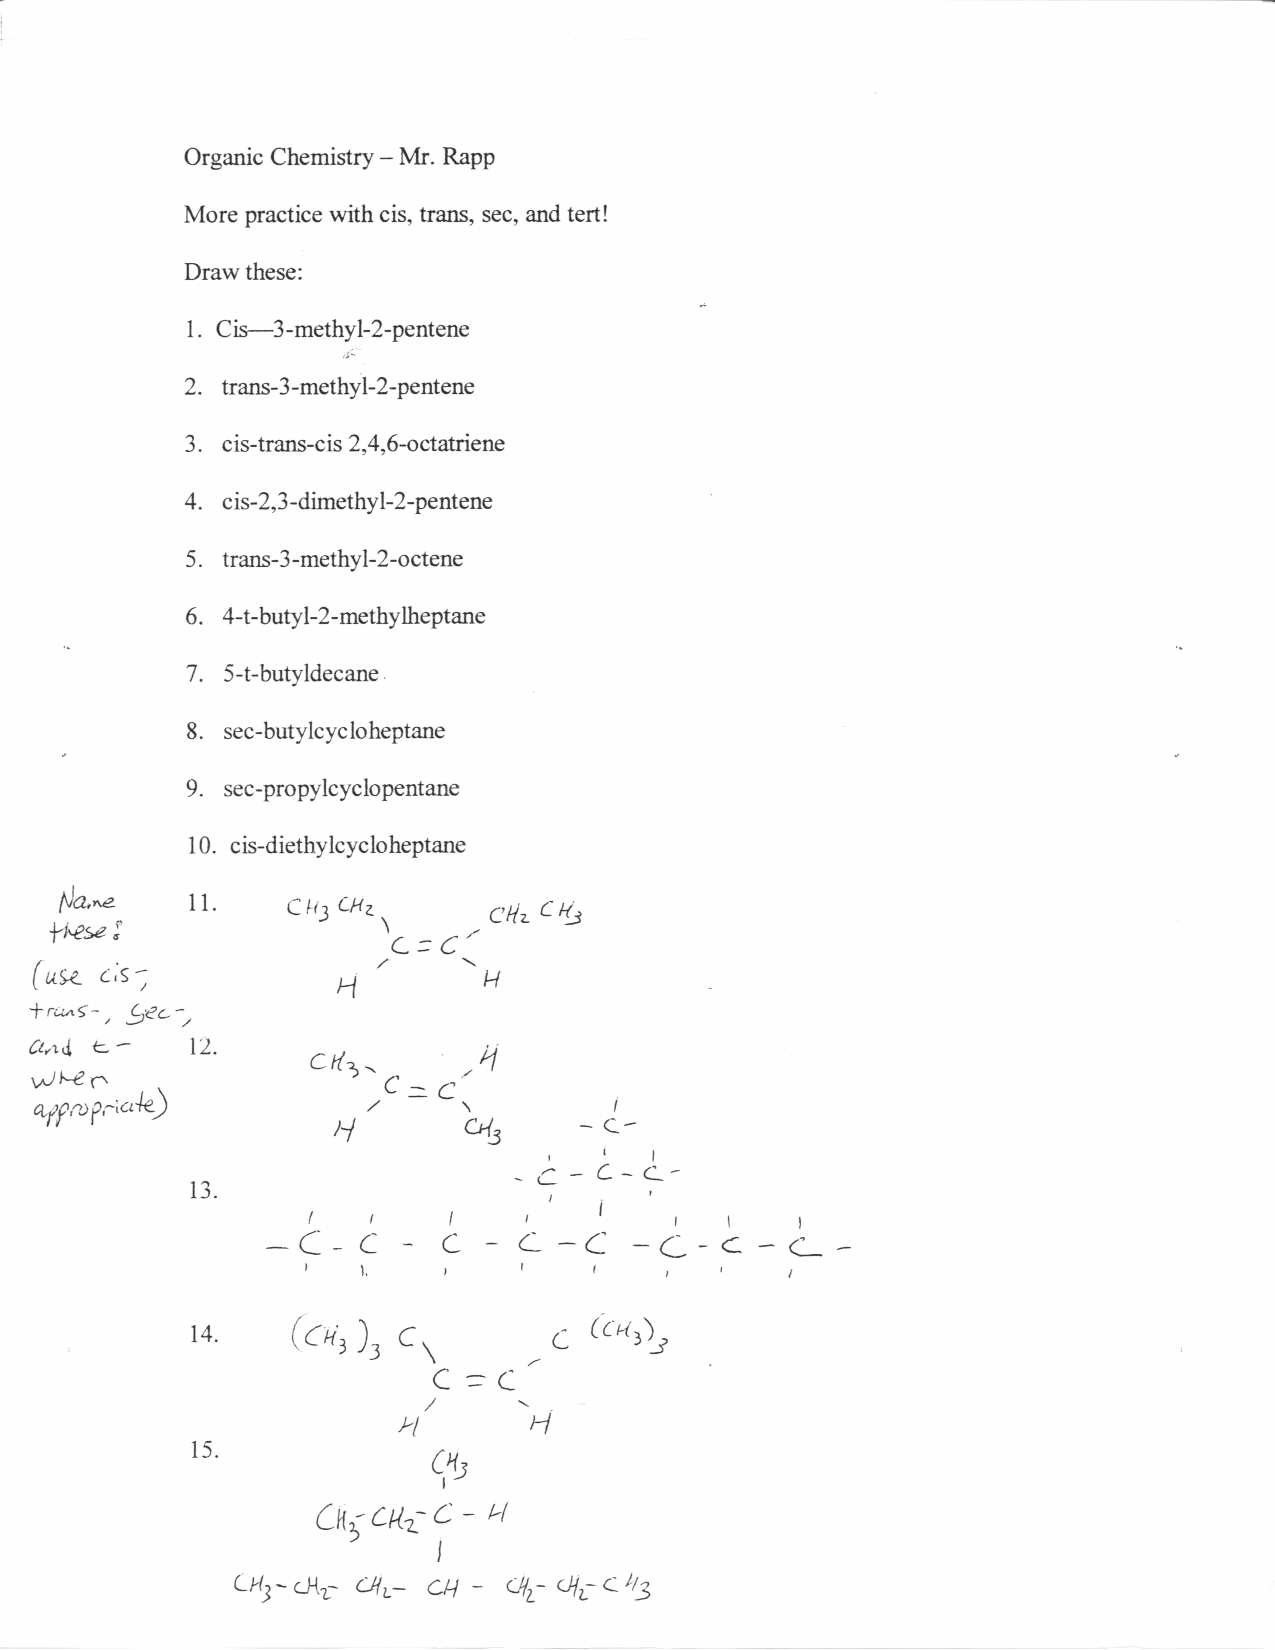 Organic Chemistry Worksheet with Answers organic Chemistry